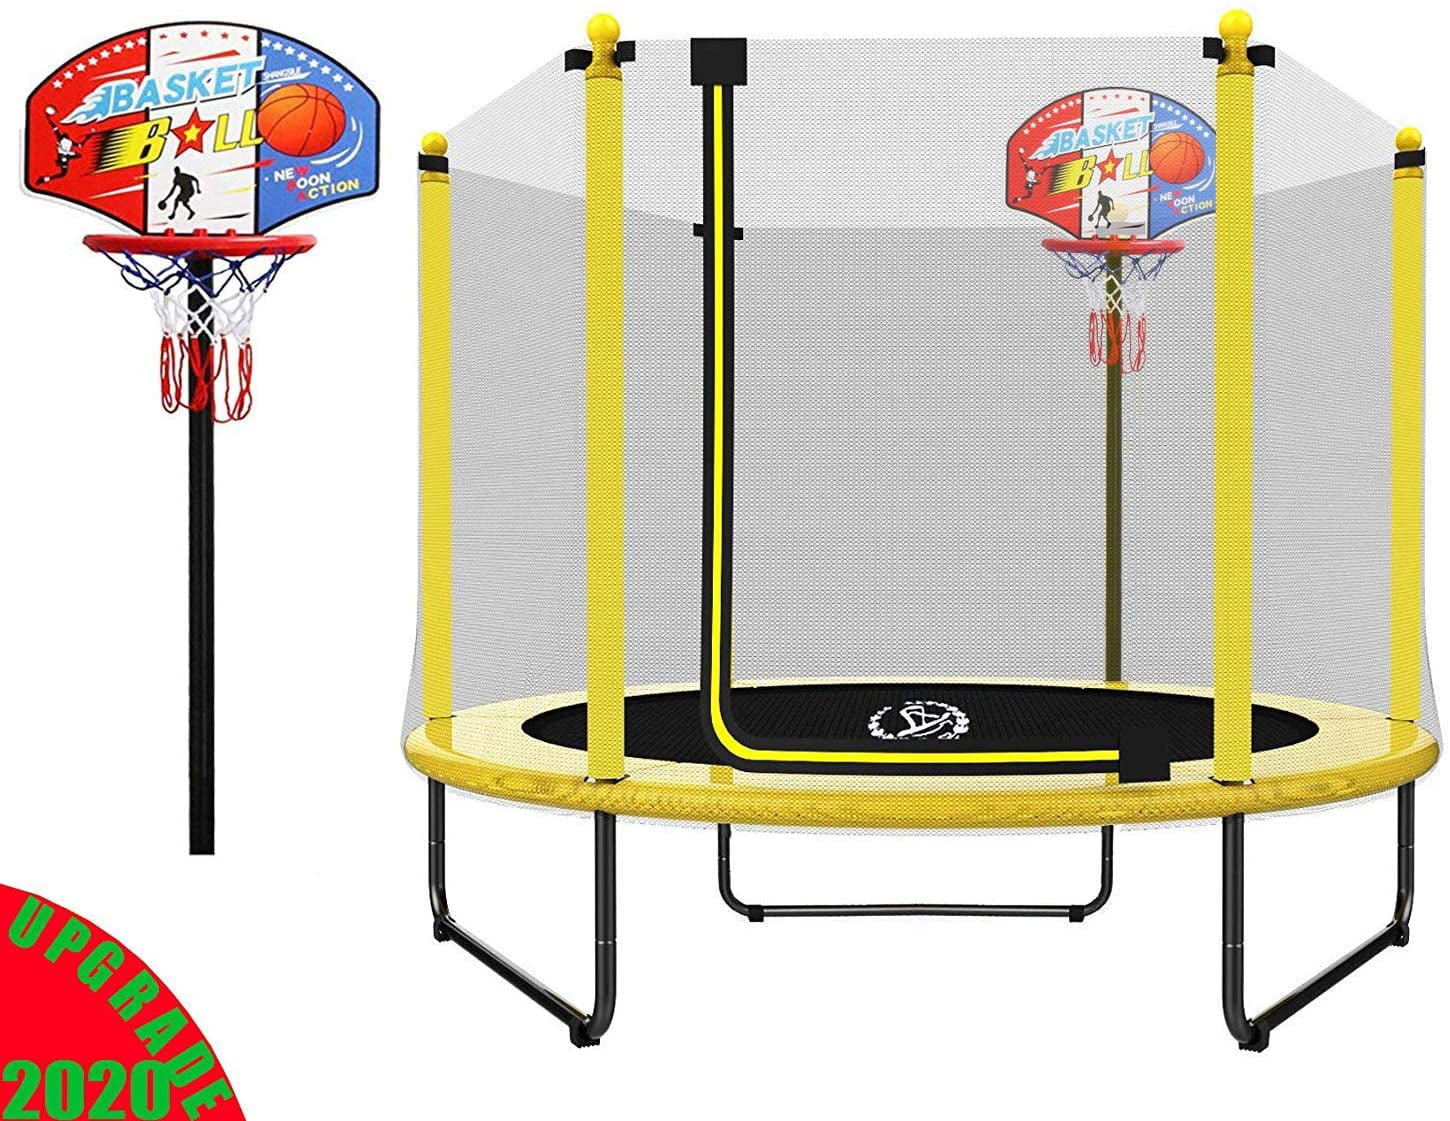 Mini Baby Toddler Trampoline with Basketball Hoop 60 Trampoline for Kids 5FT Indoor Outdoor Trampoline with Enclosure Net Recreational Trampolines Birthday Gifts for Children. 